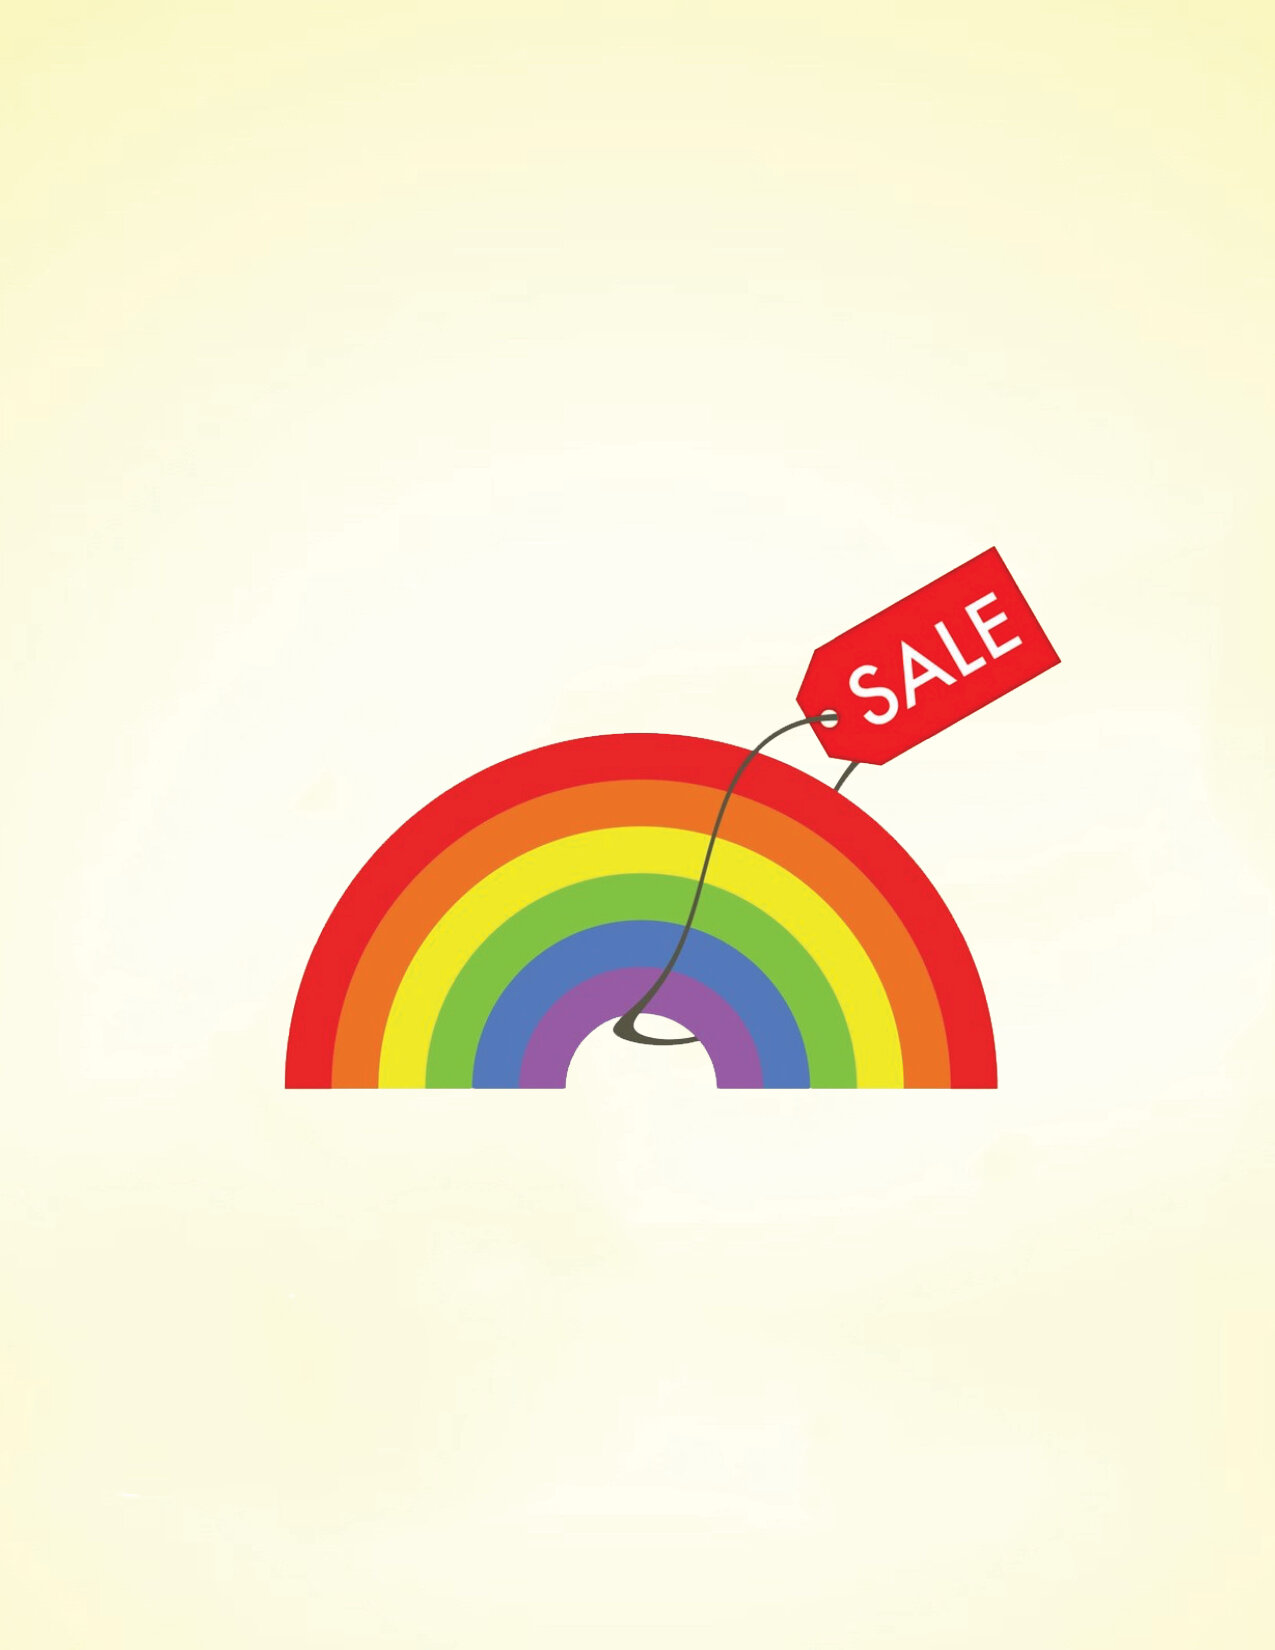 A rainbow with a sale tag on it - LGBT, pride